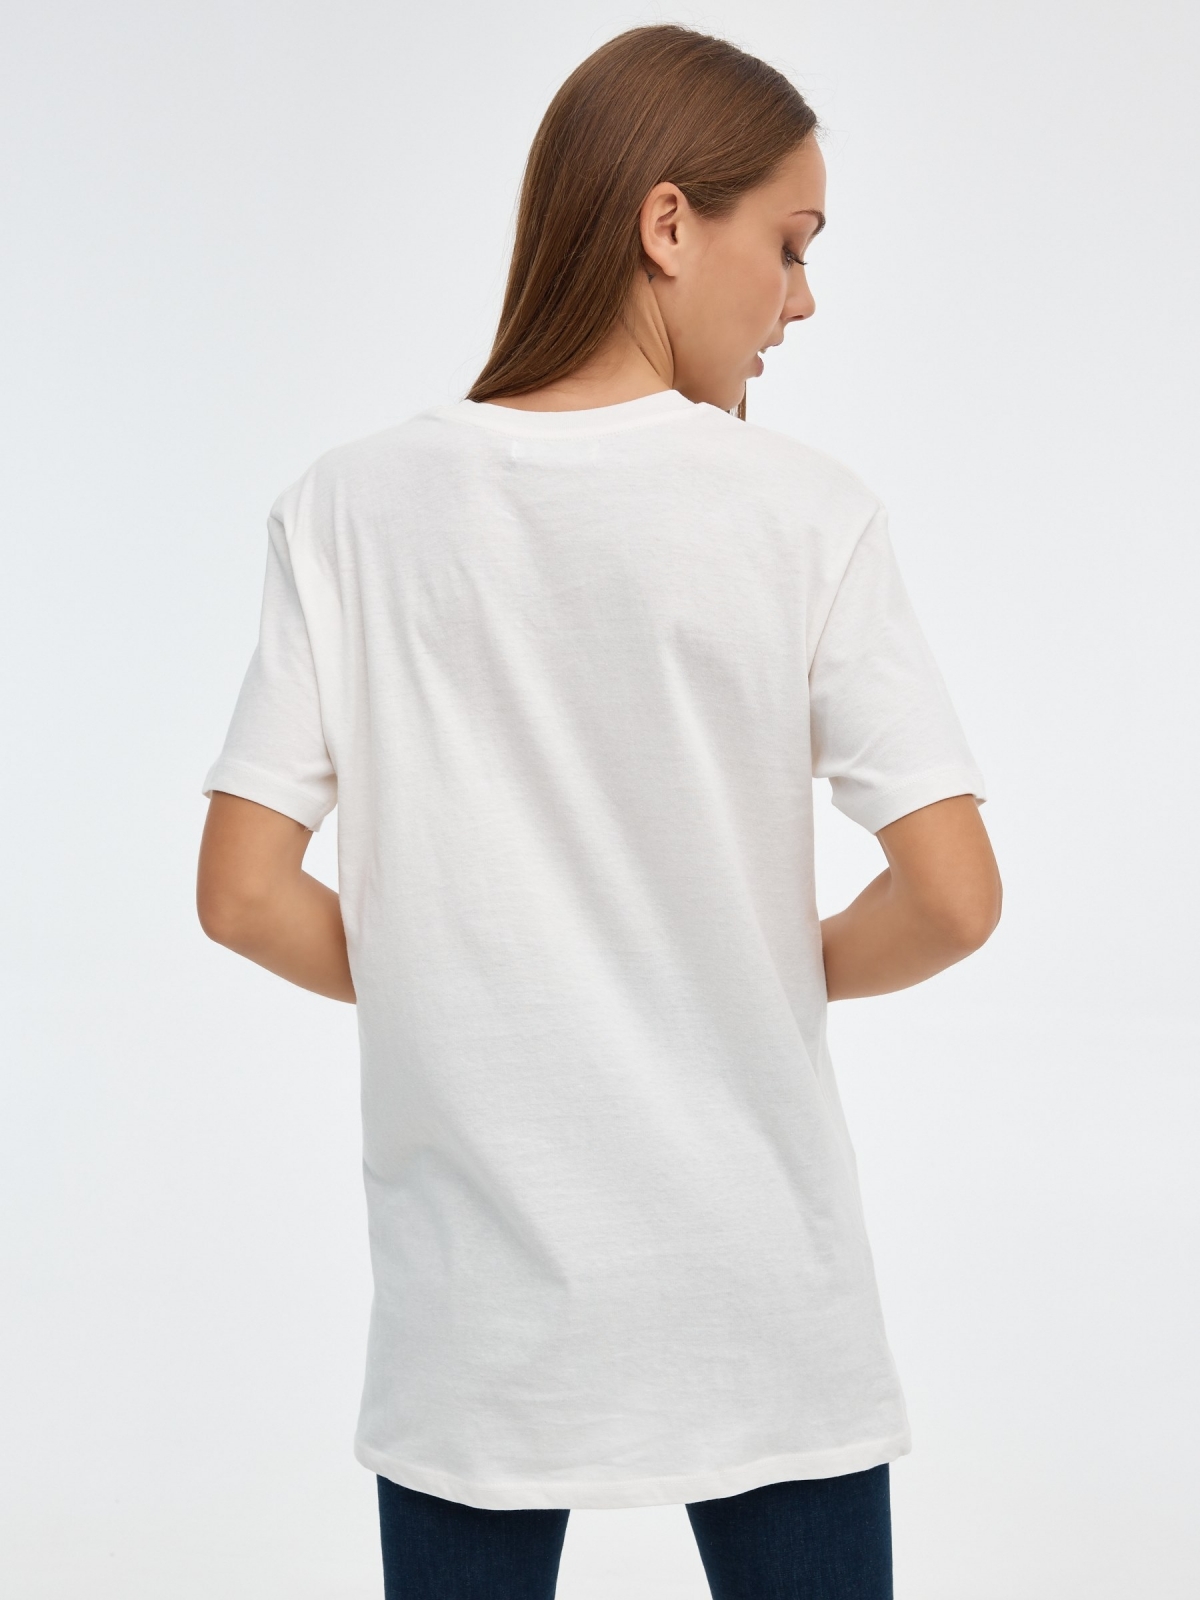 Arabica oversized T-shirt off white middle back view